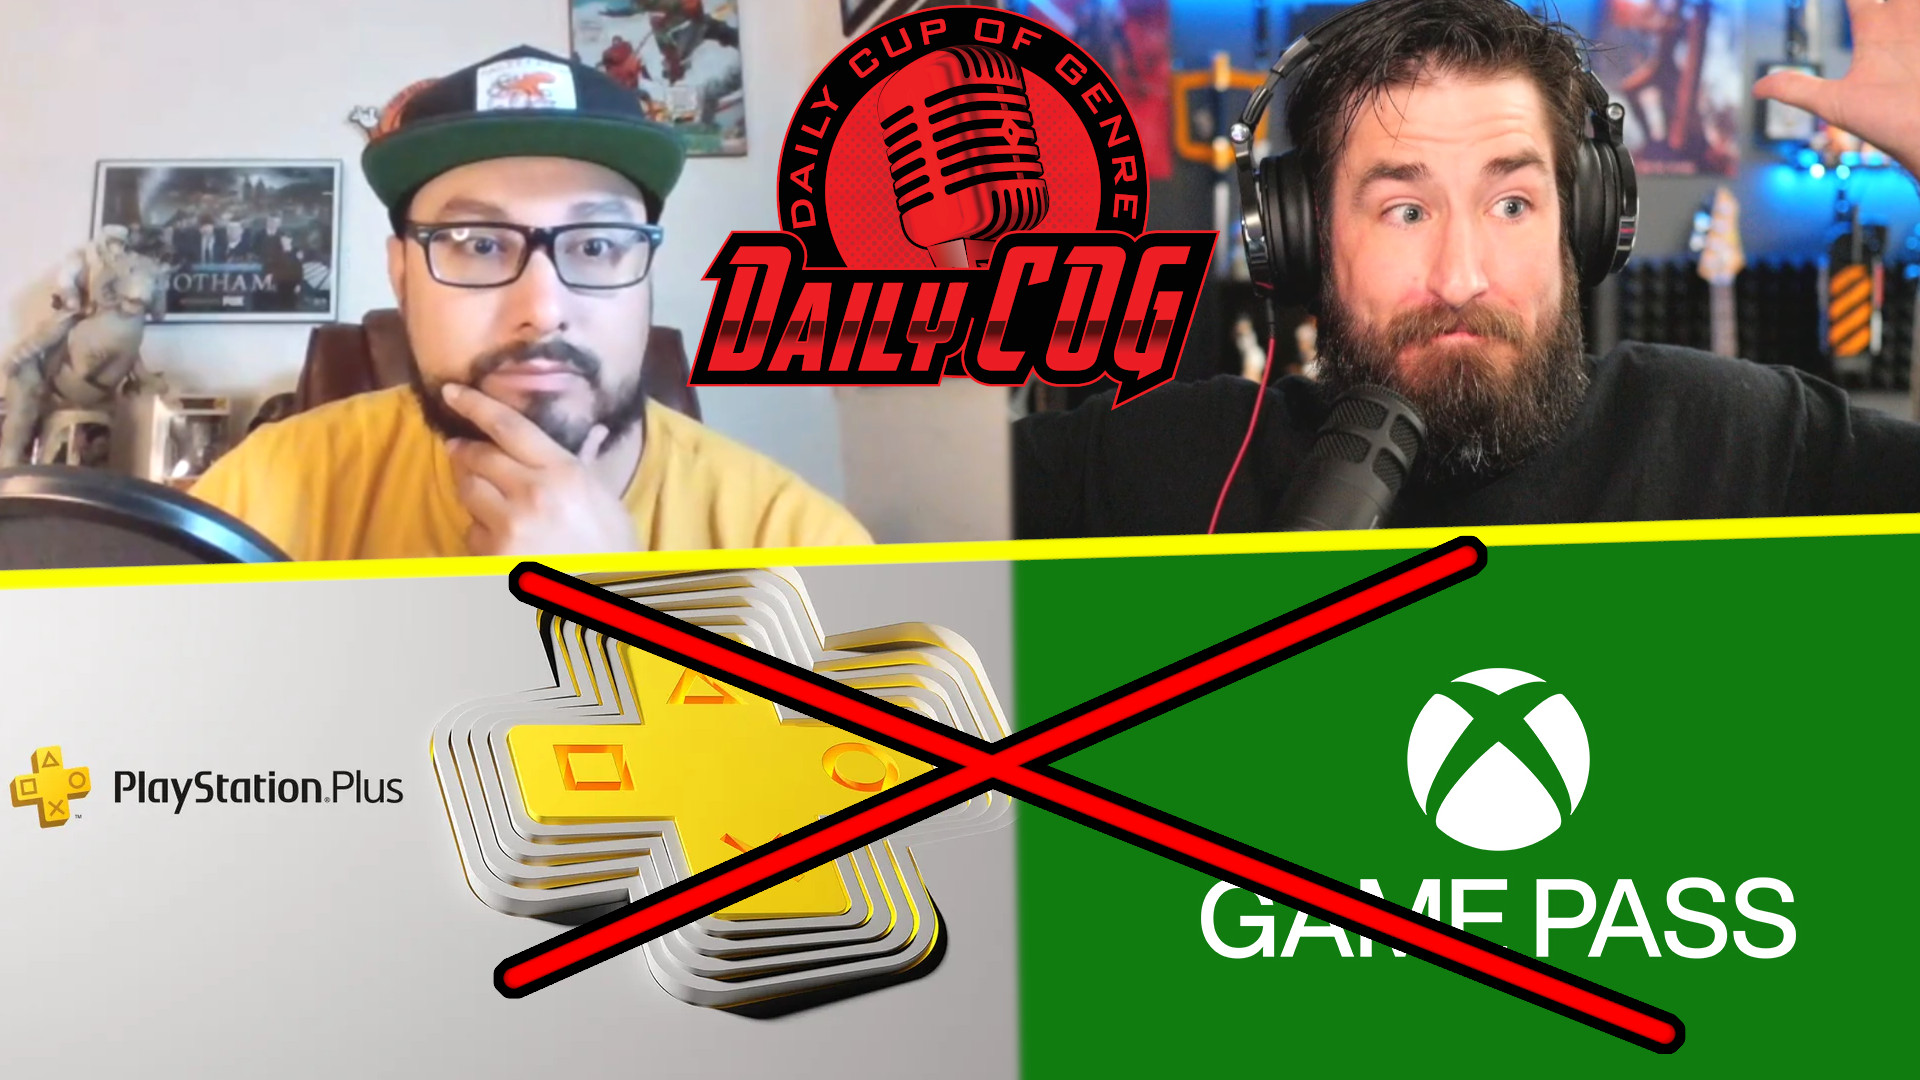 Star Wars News Talk And Gaming Subscription Services Are Bad For Gaming Daily COG Daily Cup Of Genre YT